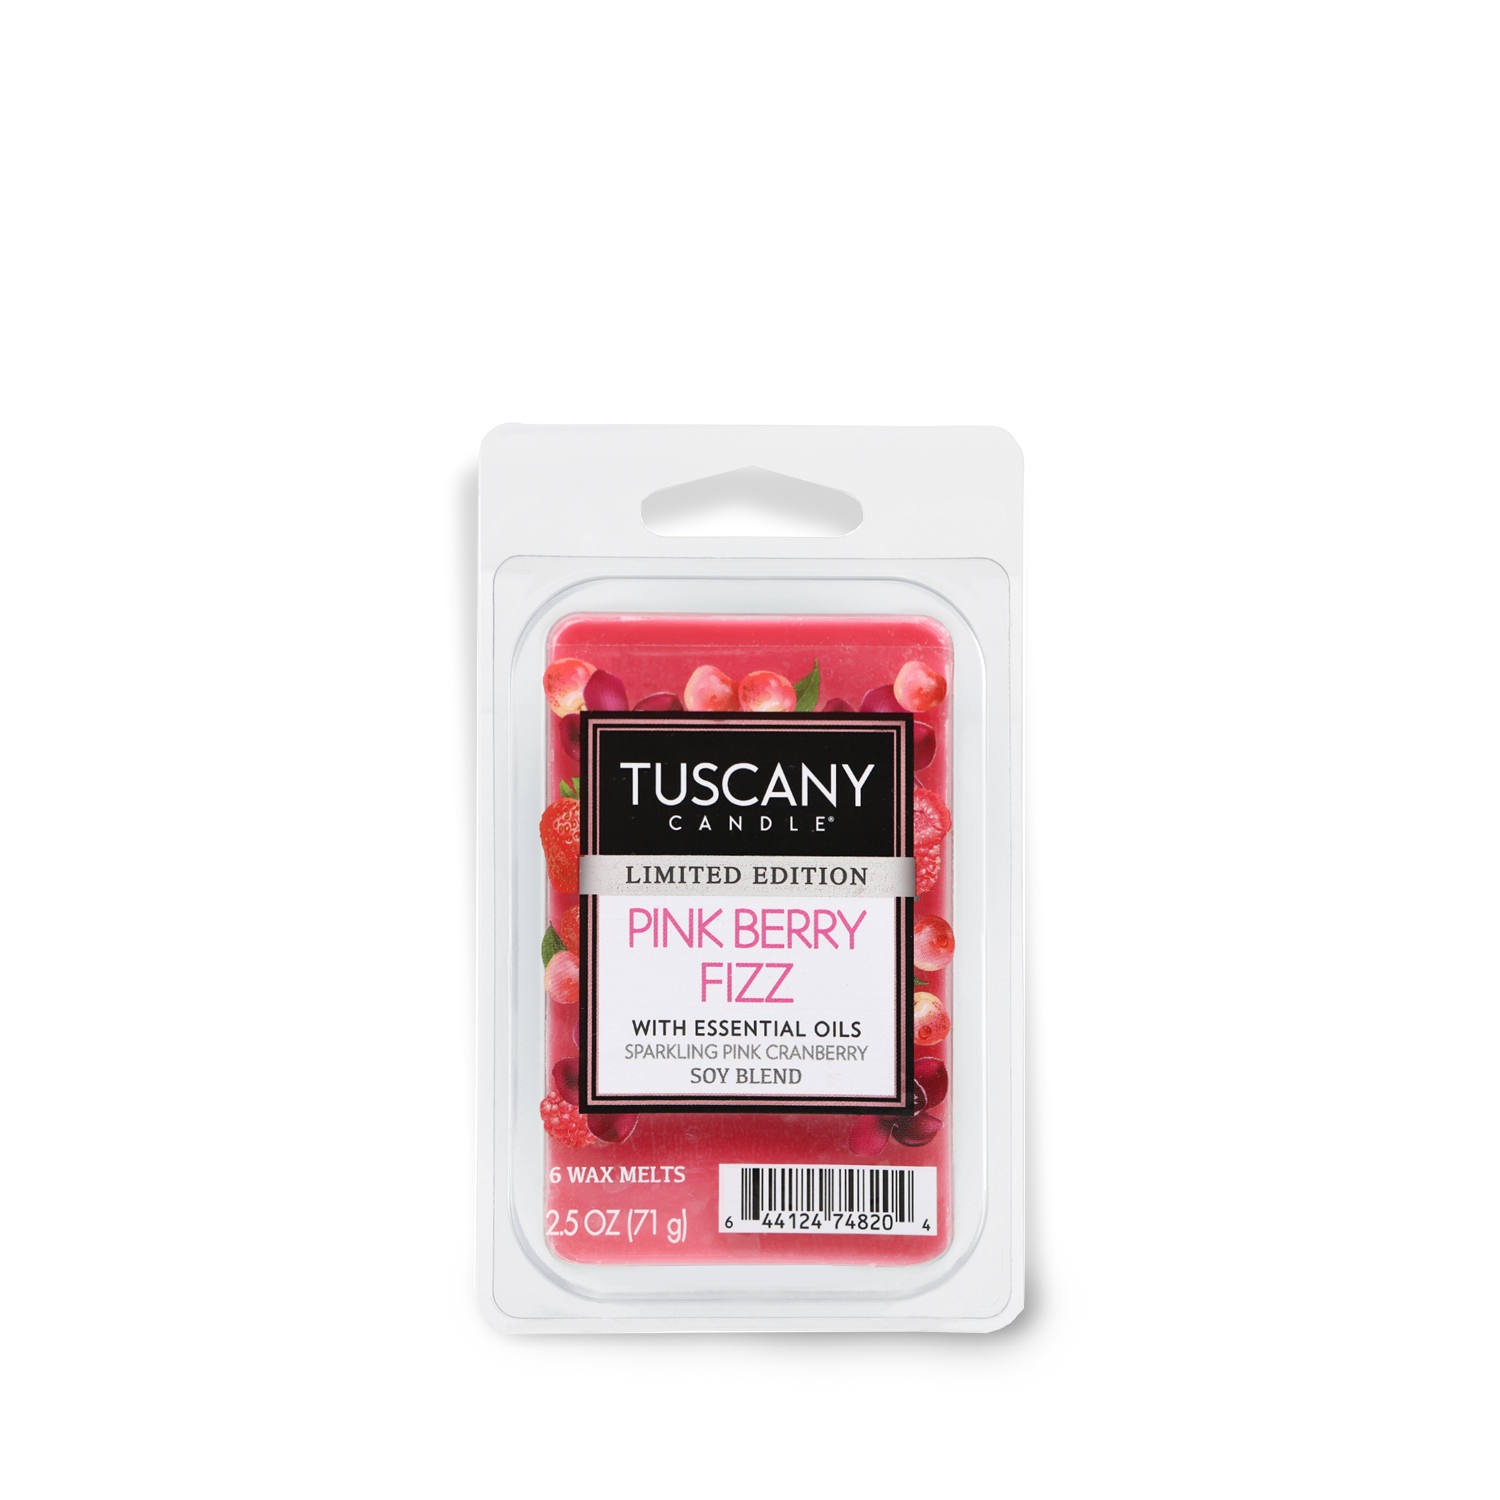 Indulge in this Tuscany Candle® SEASONAL Pink Berry Fizz scented wax melt bar, perfect for the summer season. Made with Pink Berry Fizz scent.